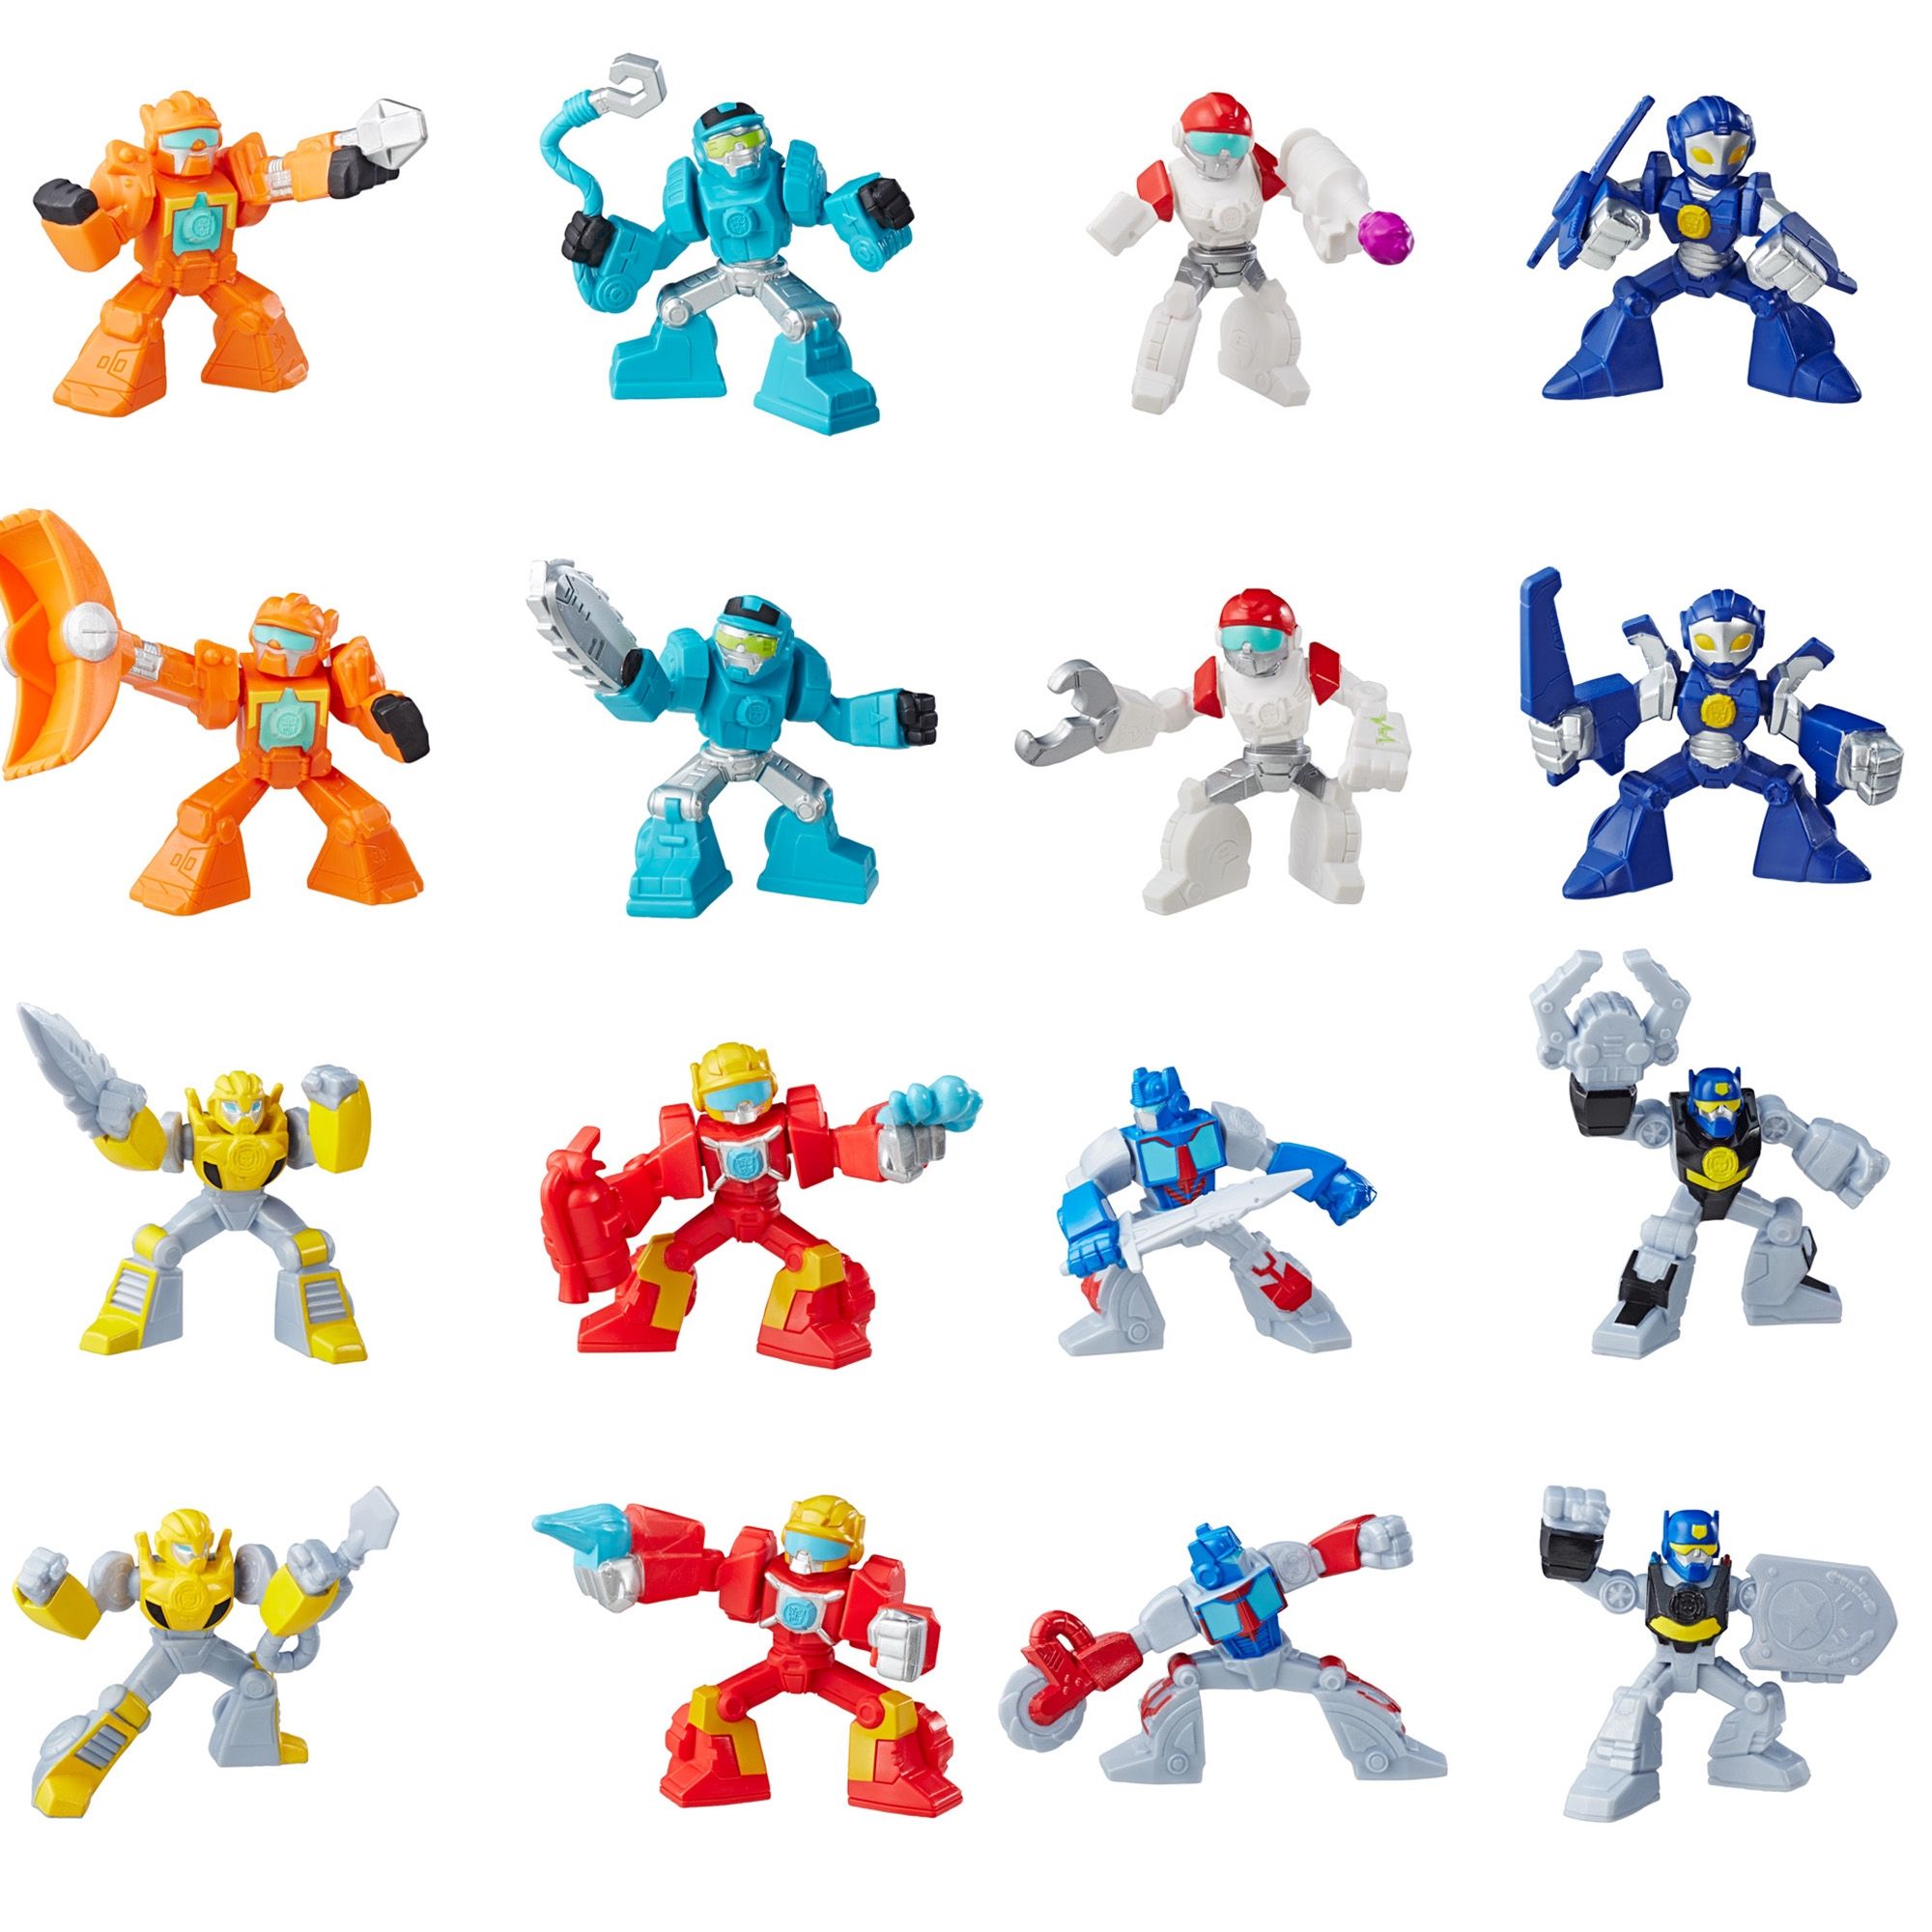 Transformers Rescue Bots Academy Mini Figures Wave 2 Revealed